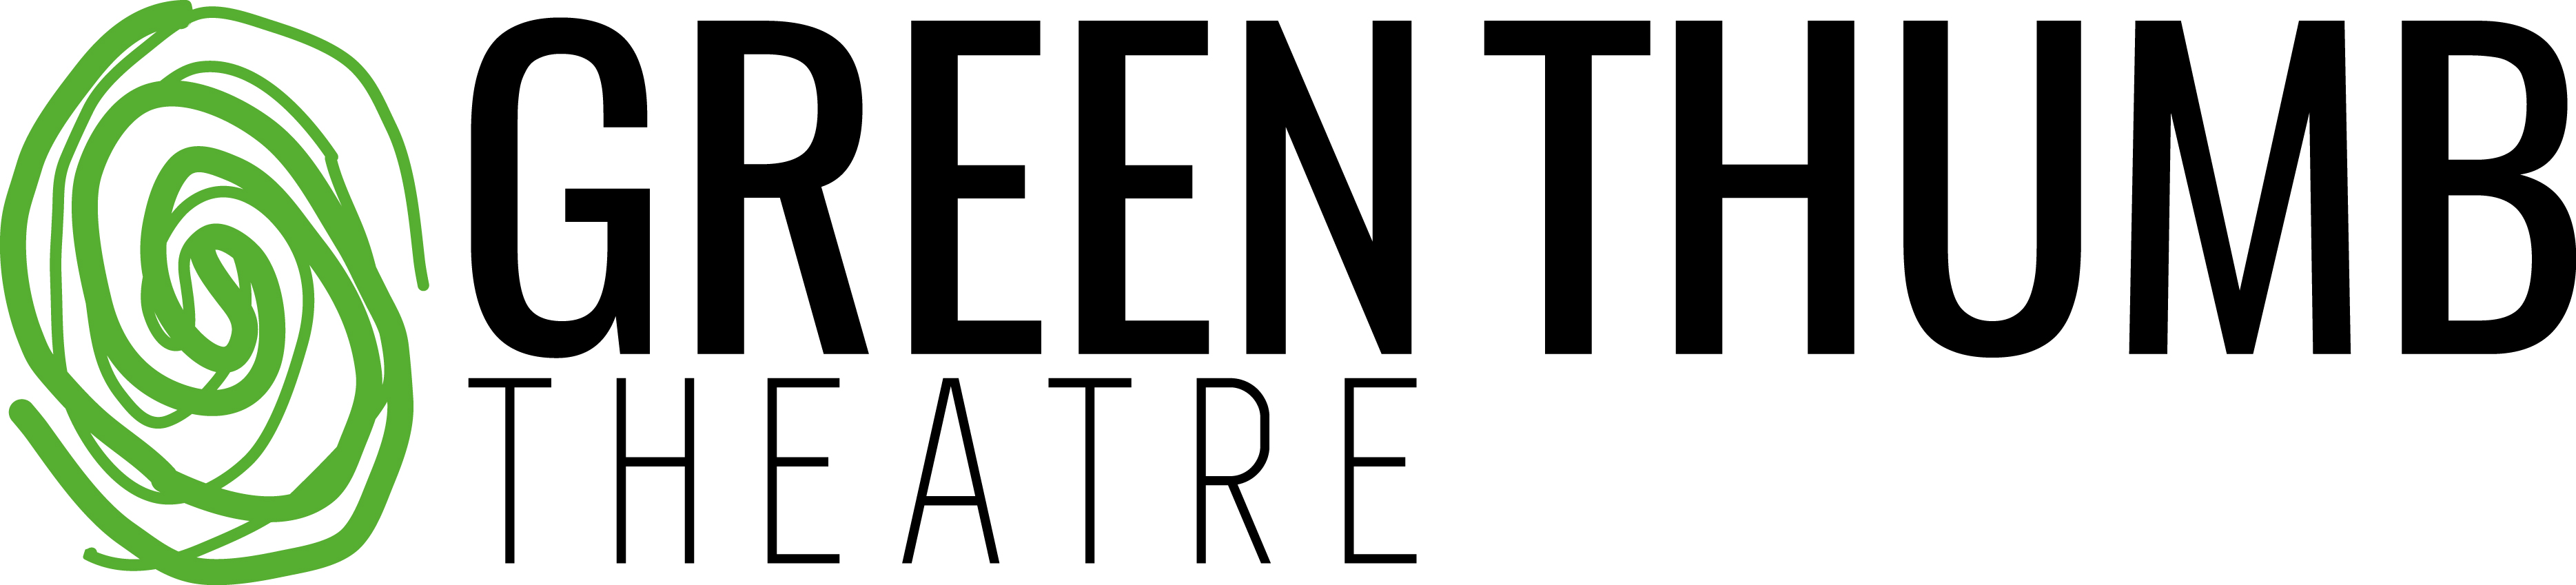 Green Thumb Theatre Logo - to the left is a green thumbprint